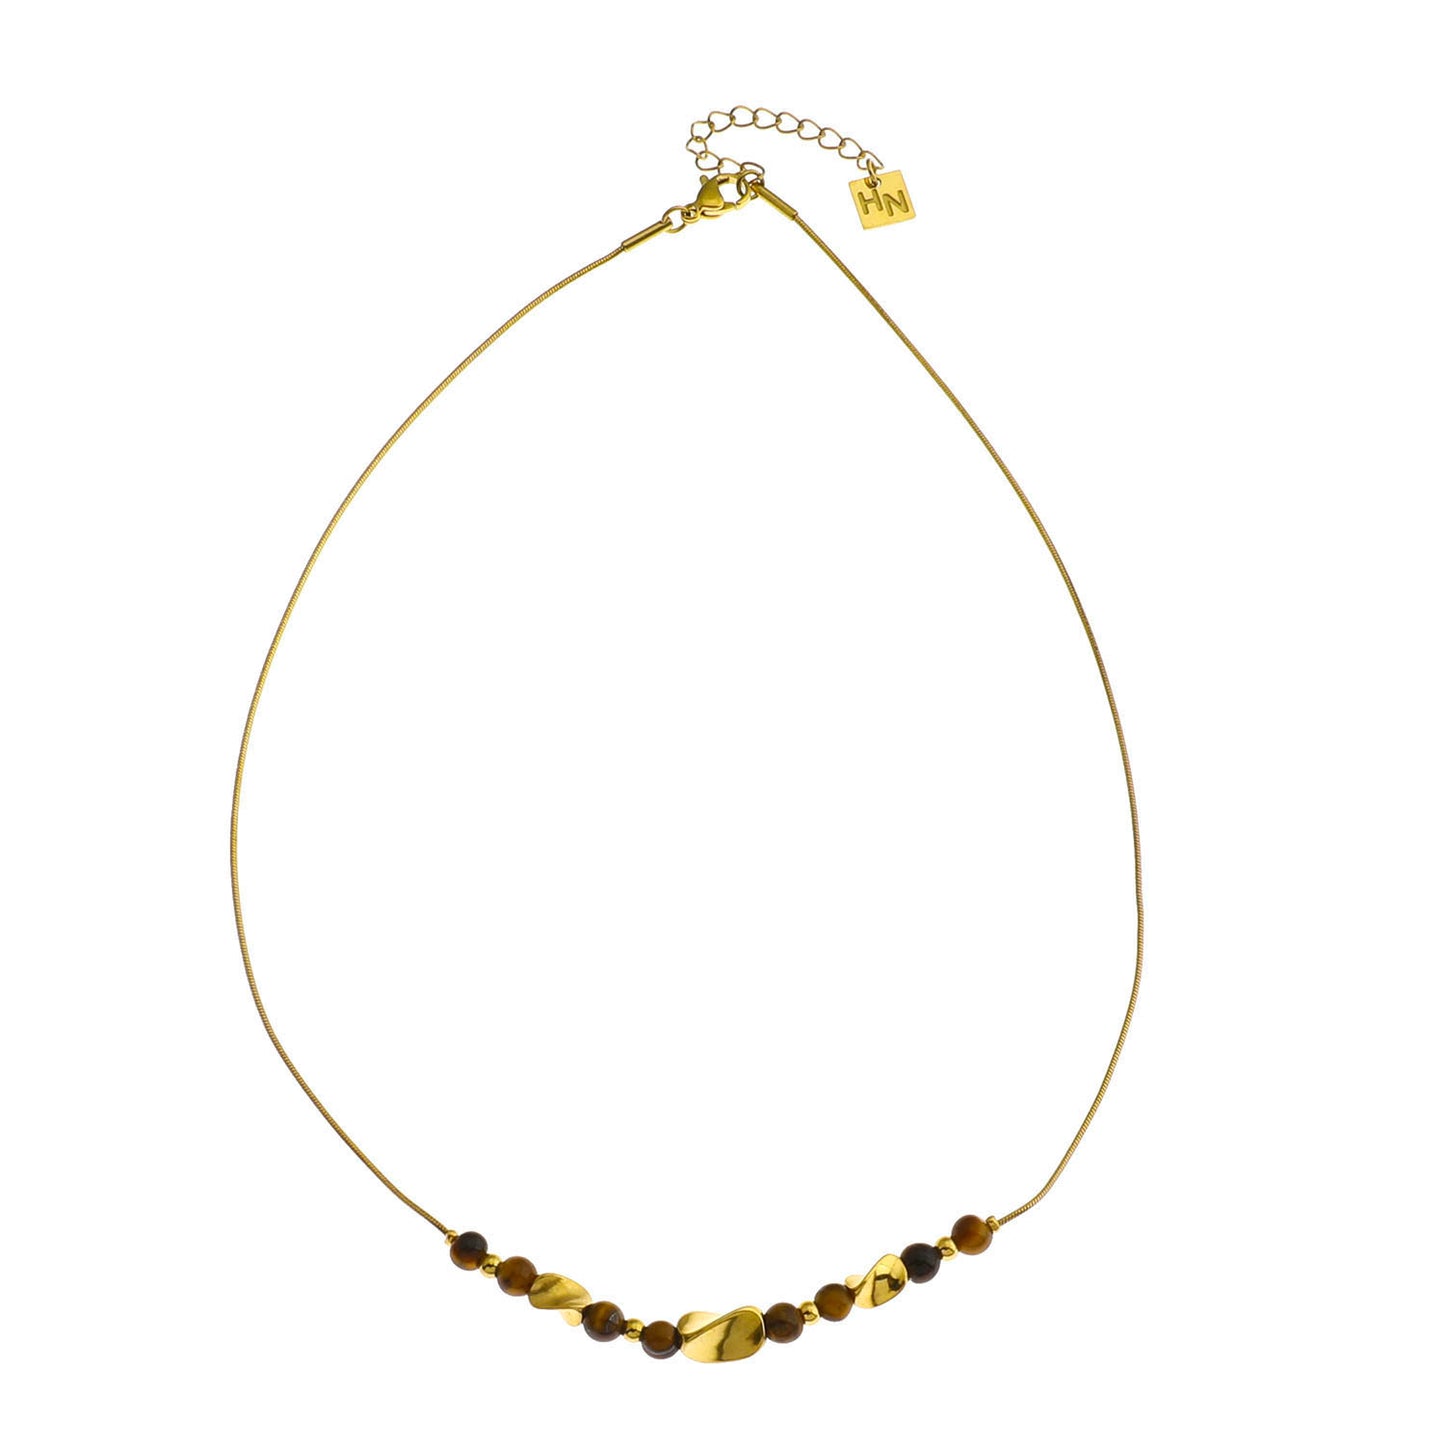 tiger's-eye-necklace | tiger's-eye-stone-necklace | tiger's-eye-jewellery | hackney-nine | hackneynine | necklace | hoops | bracelets | earrings | charms | studs_earrings | jewellery | jewellery-store | shop-jewelry | gold-jewellery | silver-jewellery | dressy_jewellery | classy_ jewellery | on_trend_jewellery | fashion_ jewellery | cool_jewellery | affordable_jewellery | designer_jewellery | vintage_jeweler | gifts-for-her | gifts-for-mum | gifts-for-girls | gifts-for-females |